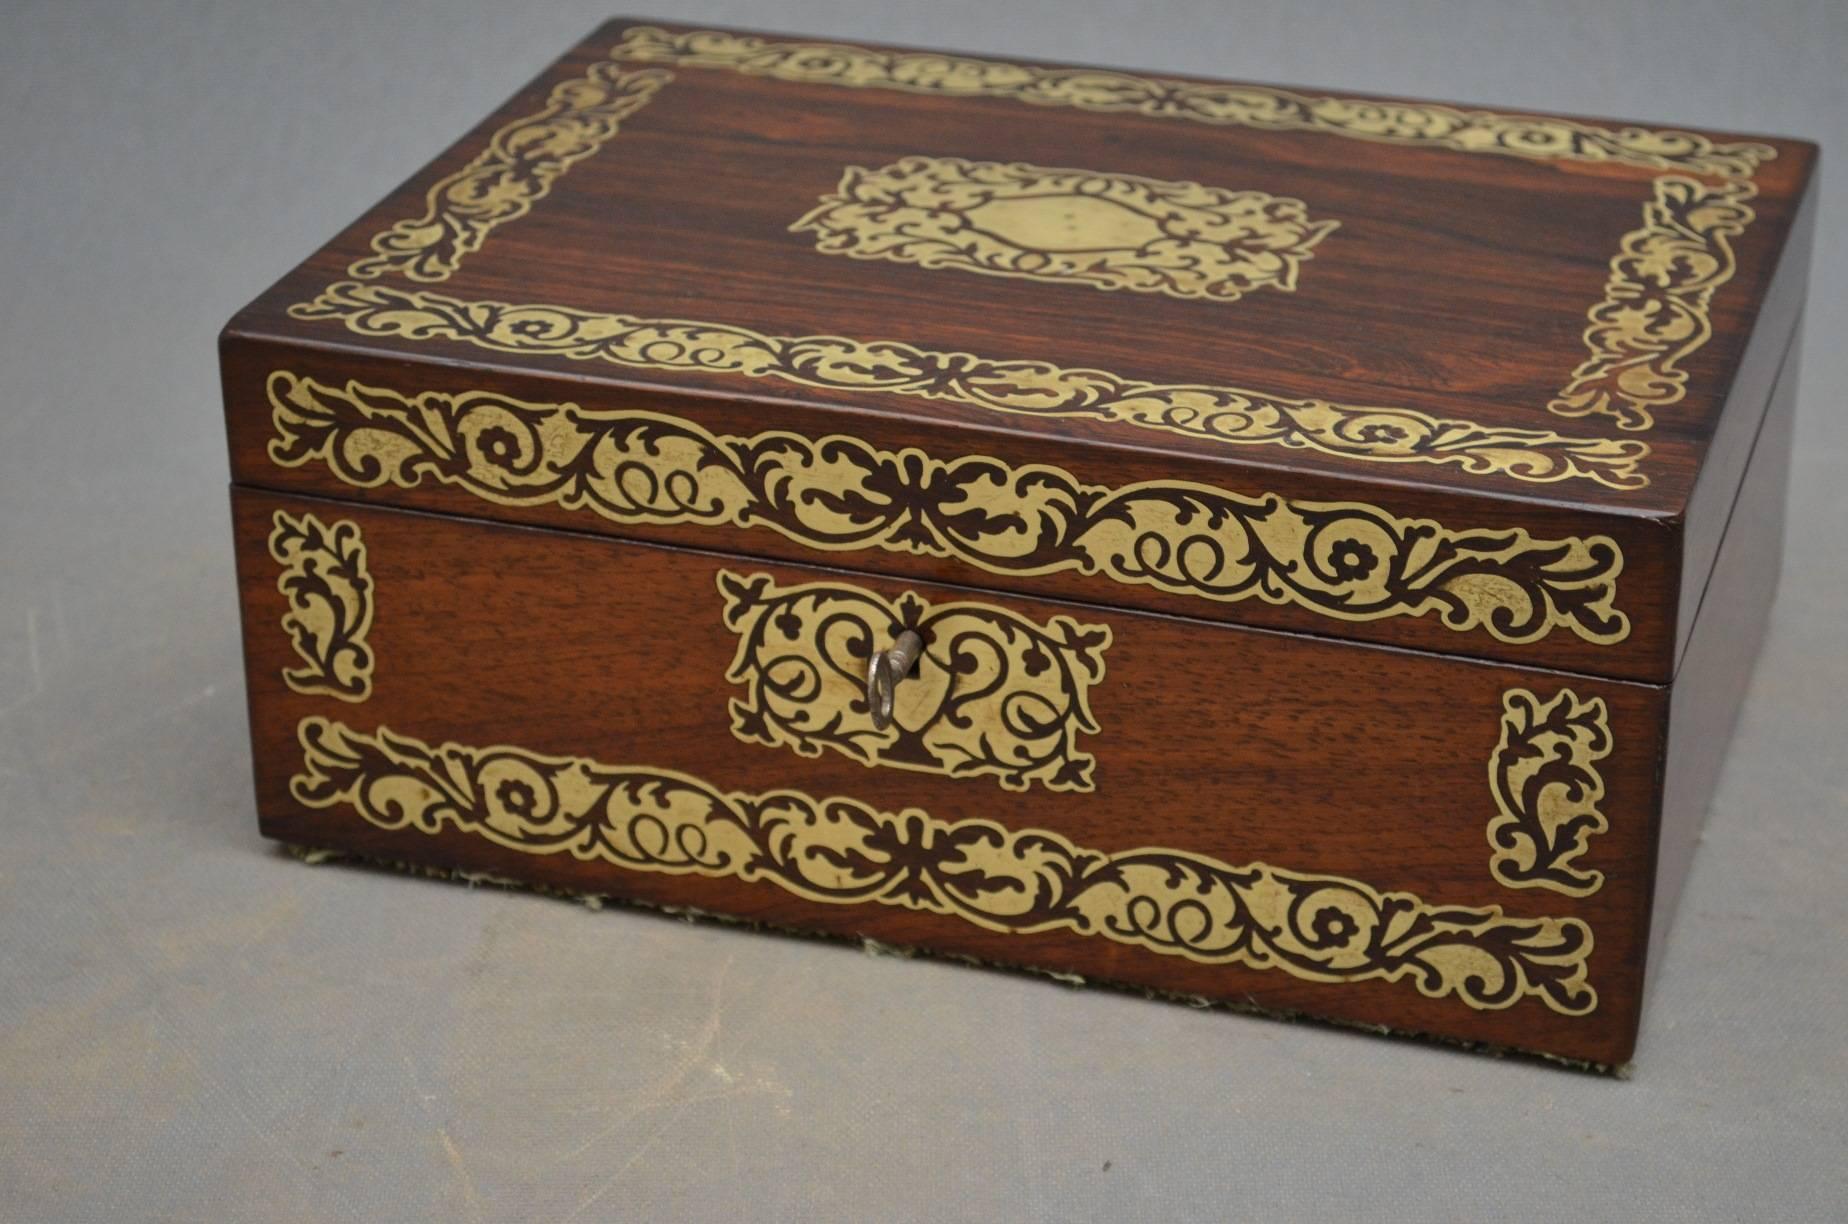 English Regency Brass Inlaid Rosewood jewelry Box with Relined Interior